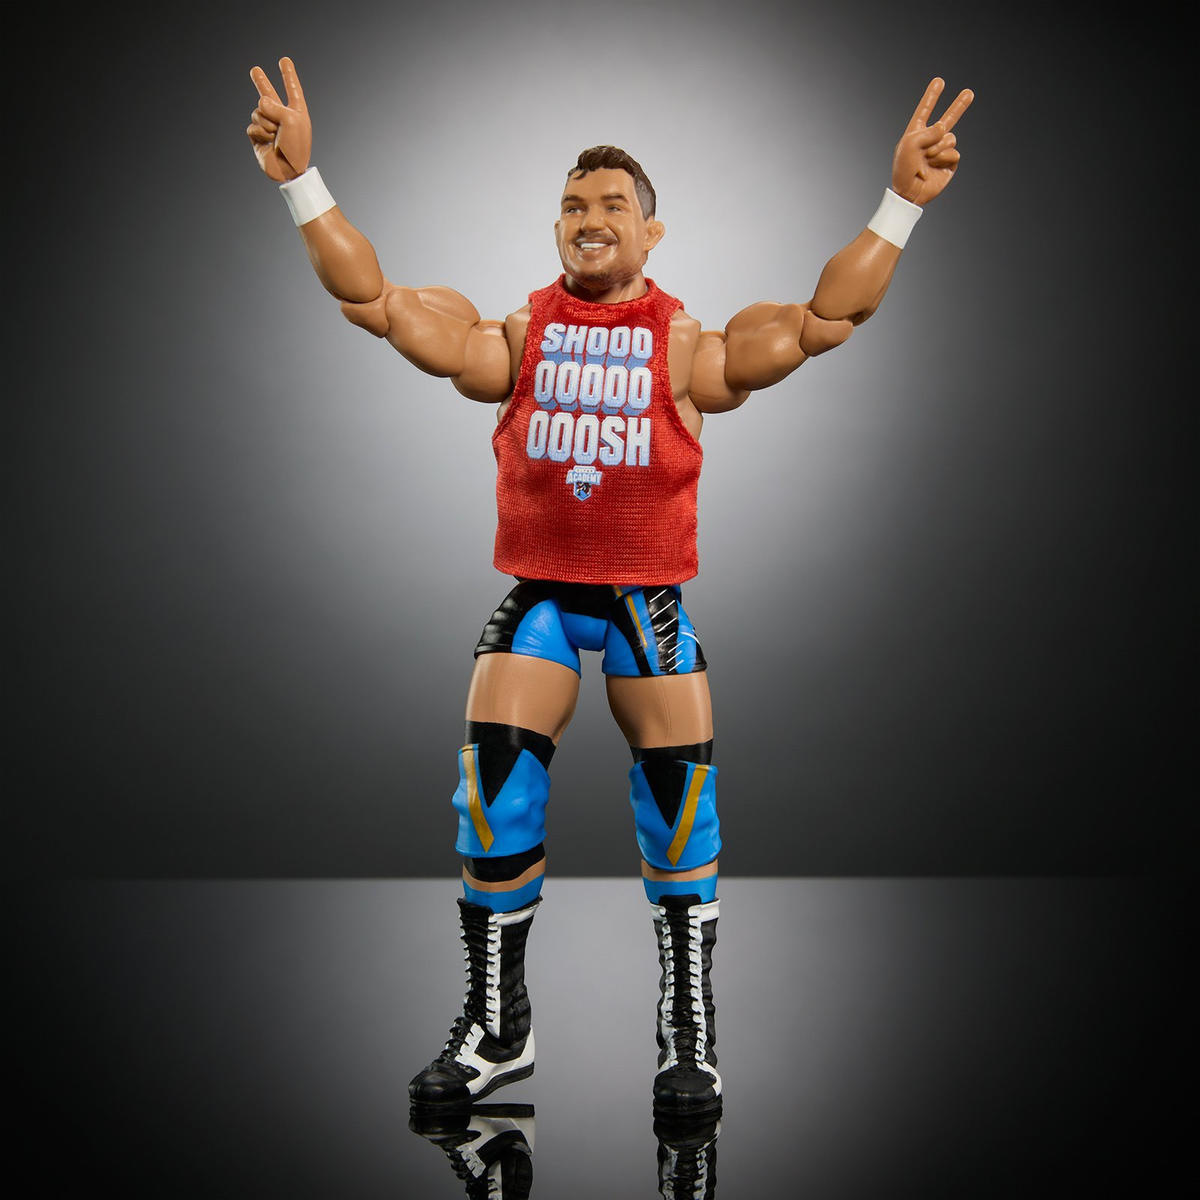 2023 WWE Mattel Elite Collection Series 106 Chad Gable